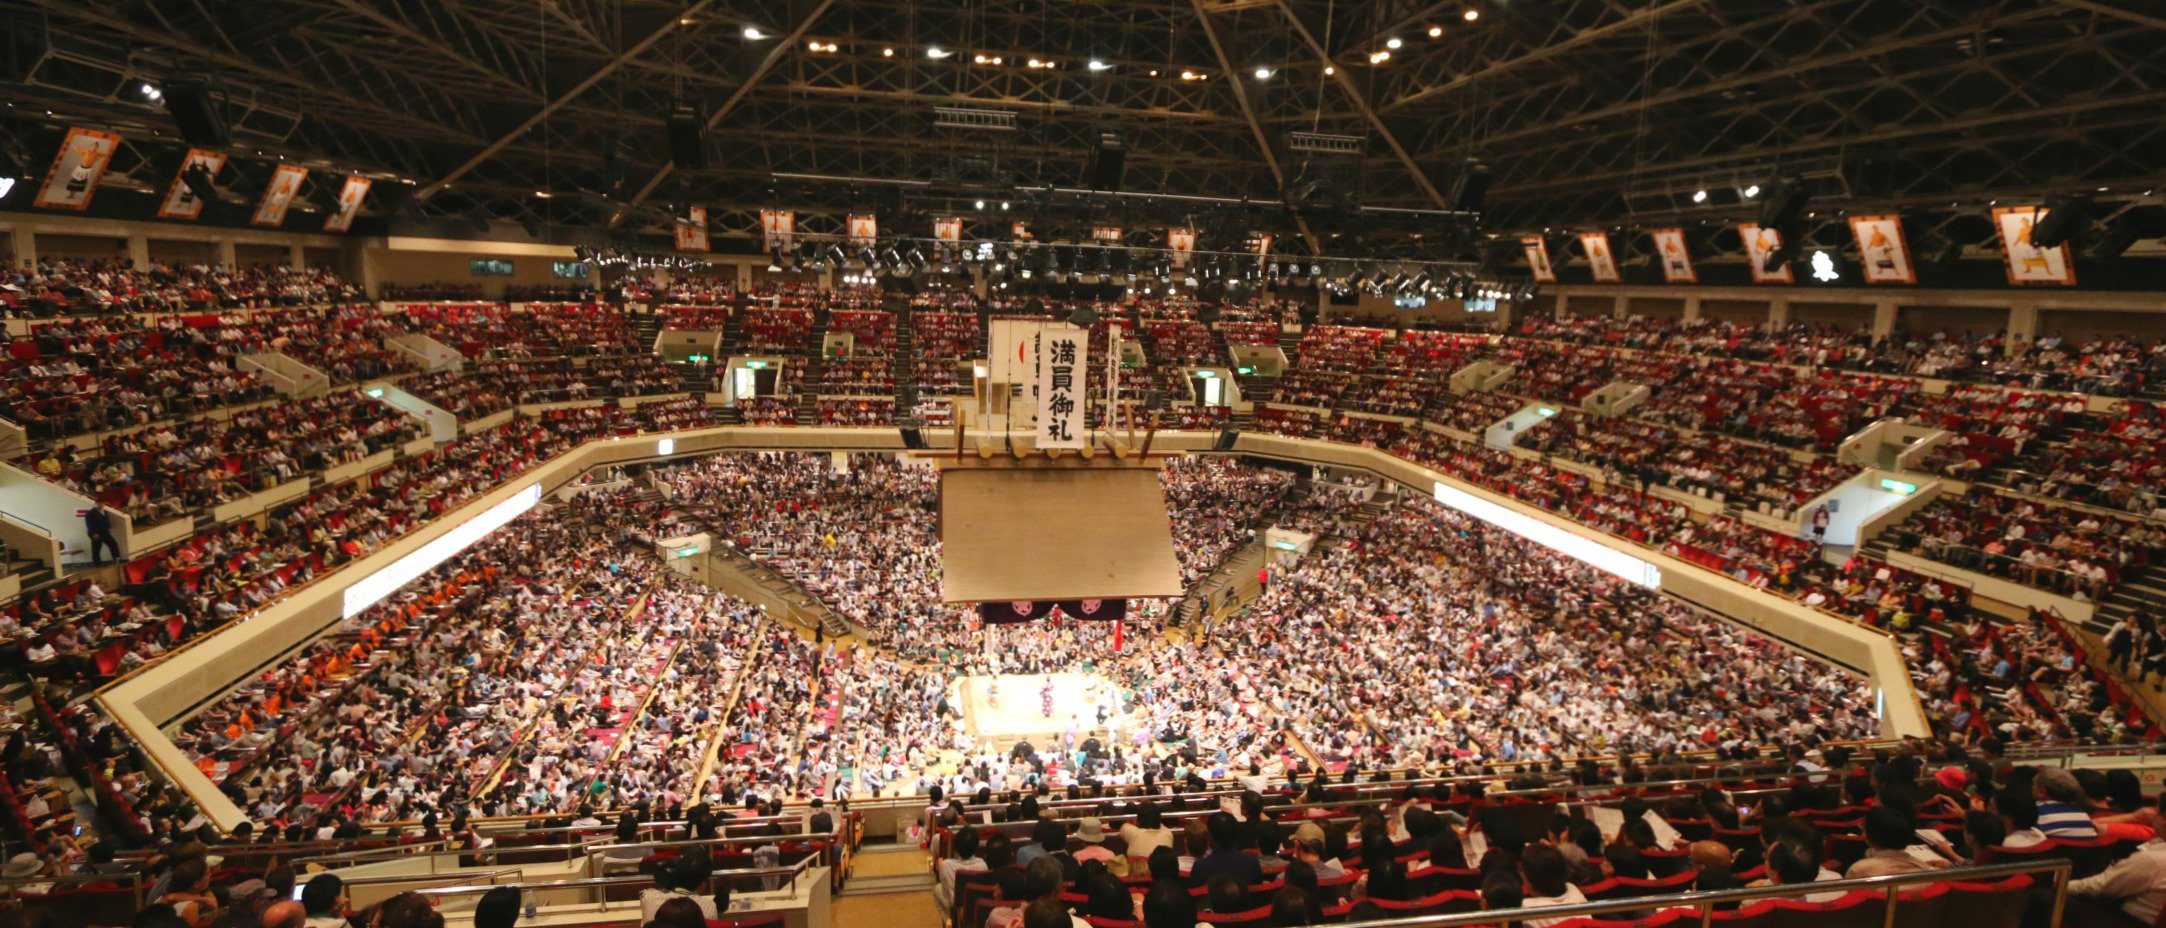 Inside the Ryogoku Kokugikan Sumo Wrestling Arena in Tokyo During the professional Level Bouts - Mostly Full!